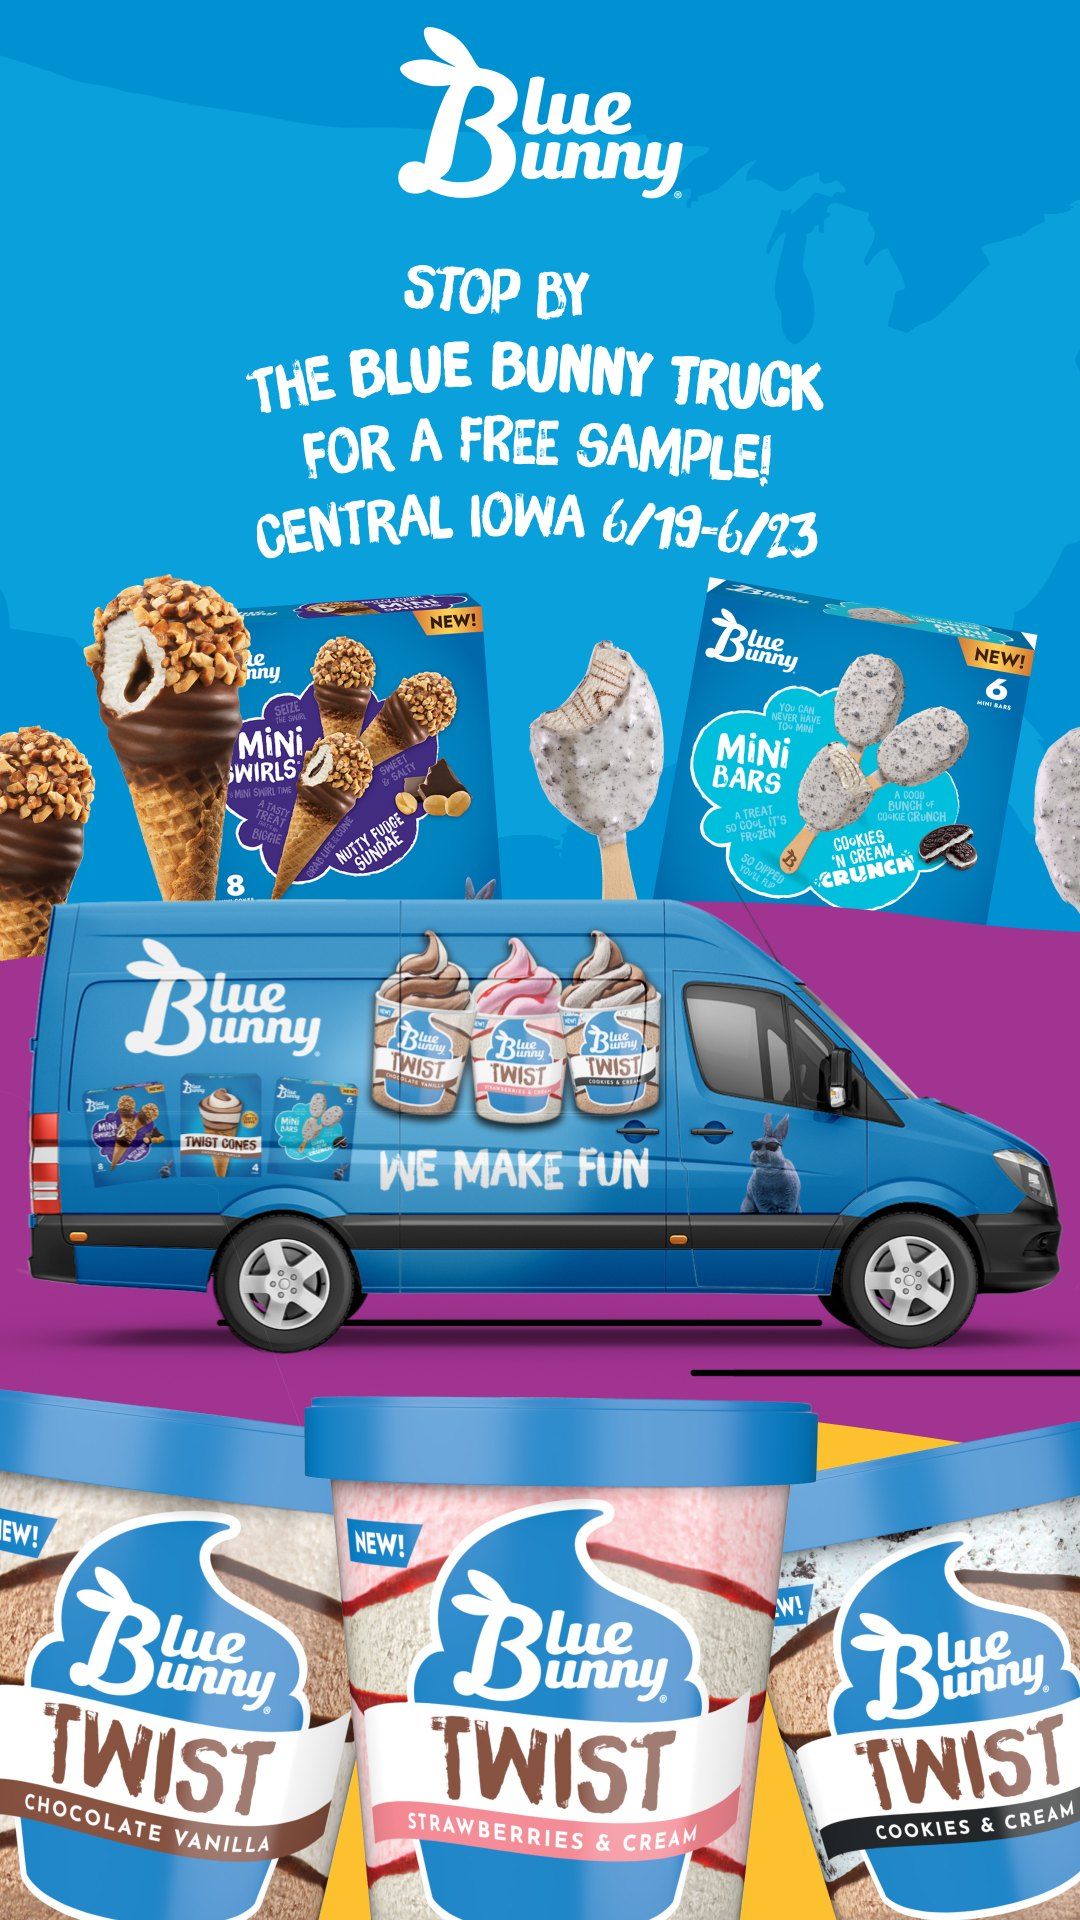 Blue Bunny Truck and Samples at Westlakes Hy-Vee